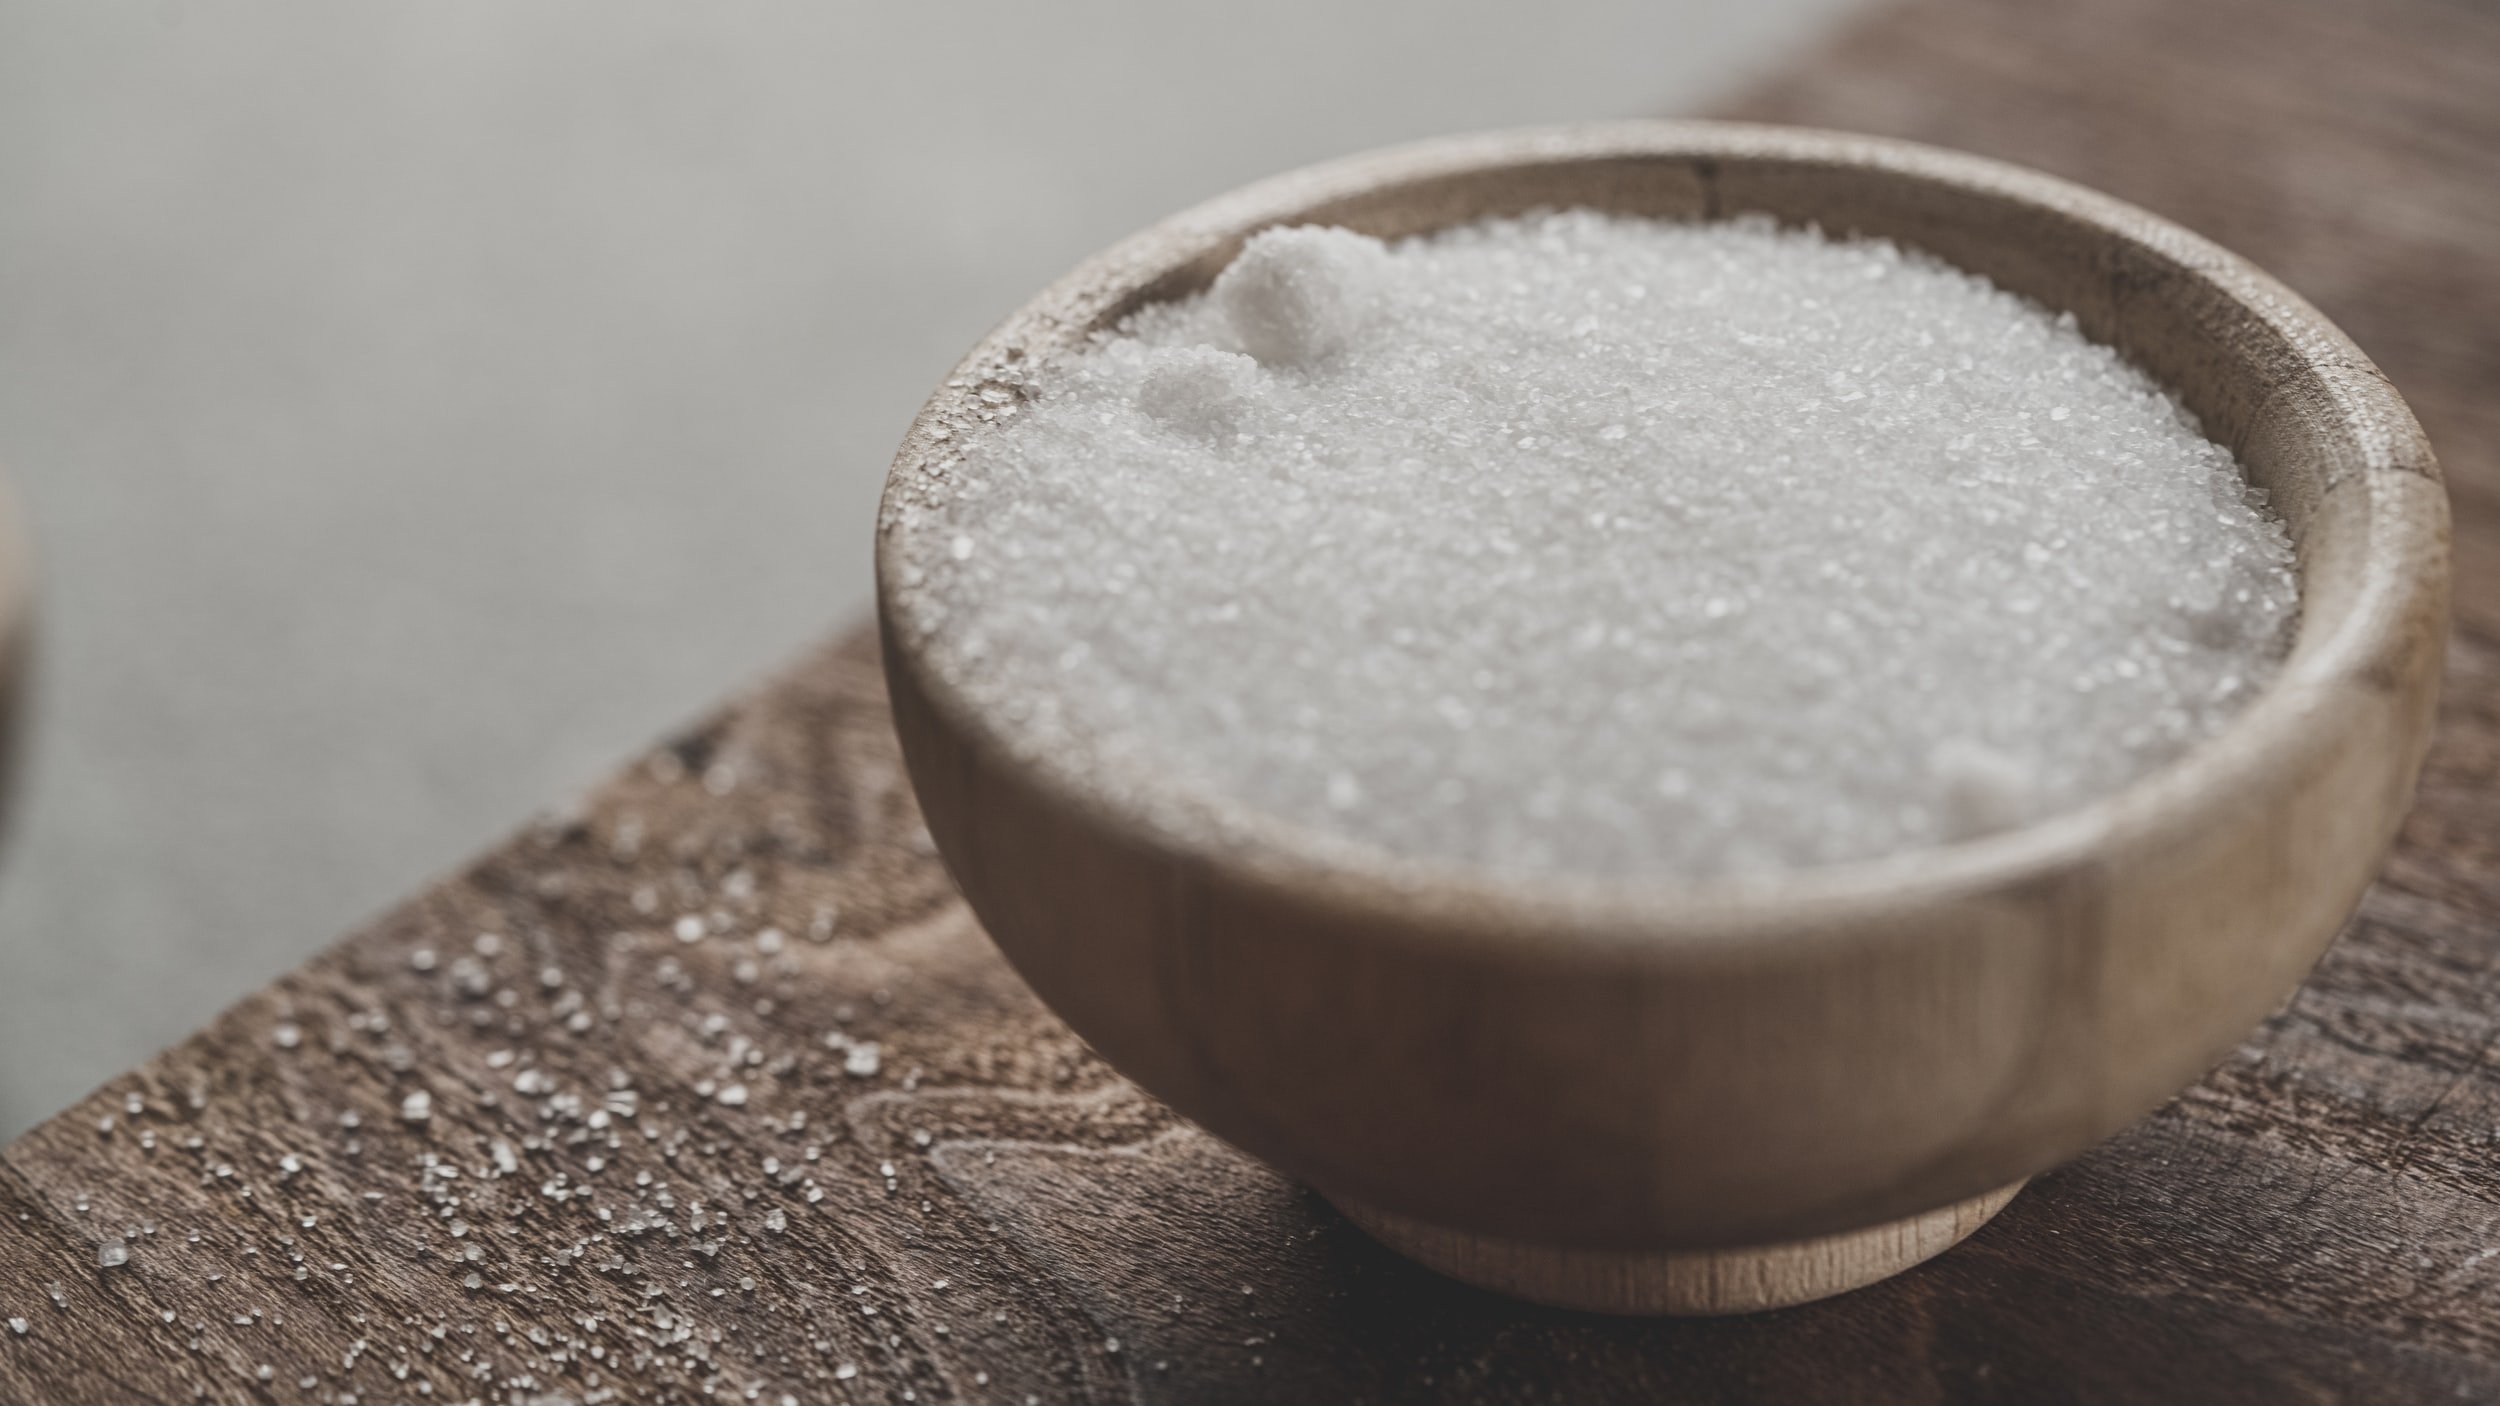 Heard of Xylitol or Erythritol? They’re Sugar-Substitutes that Clean Your Teeth